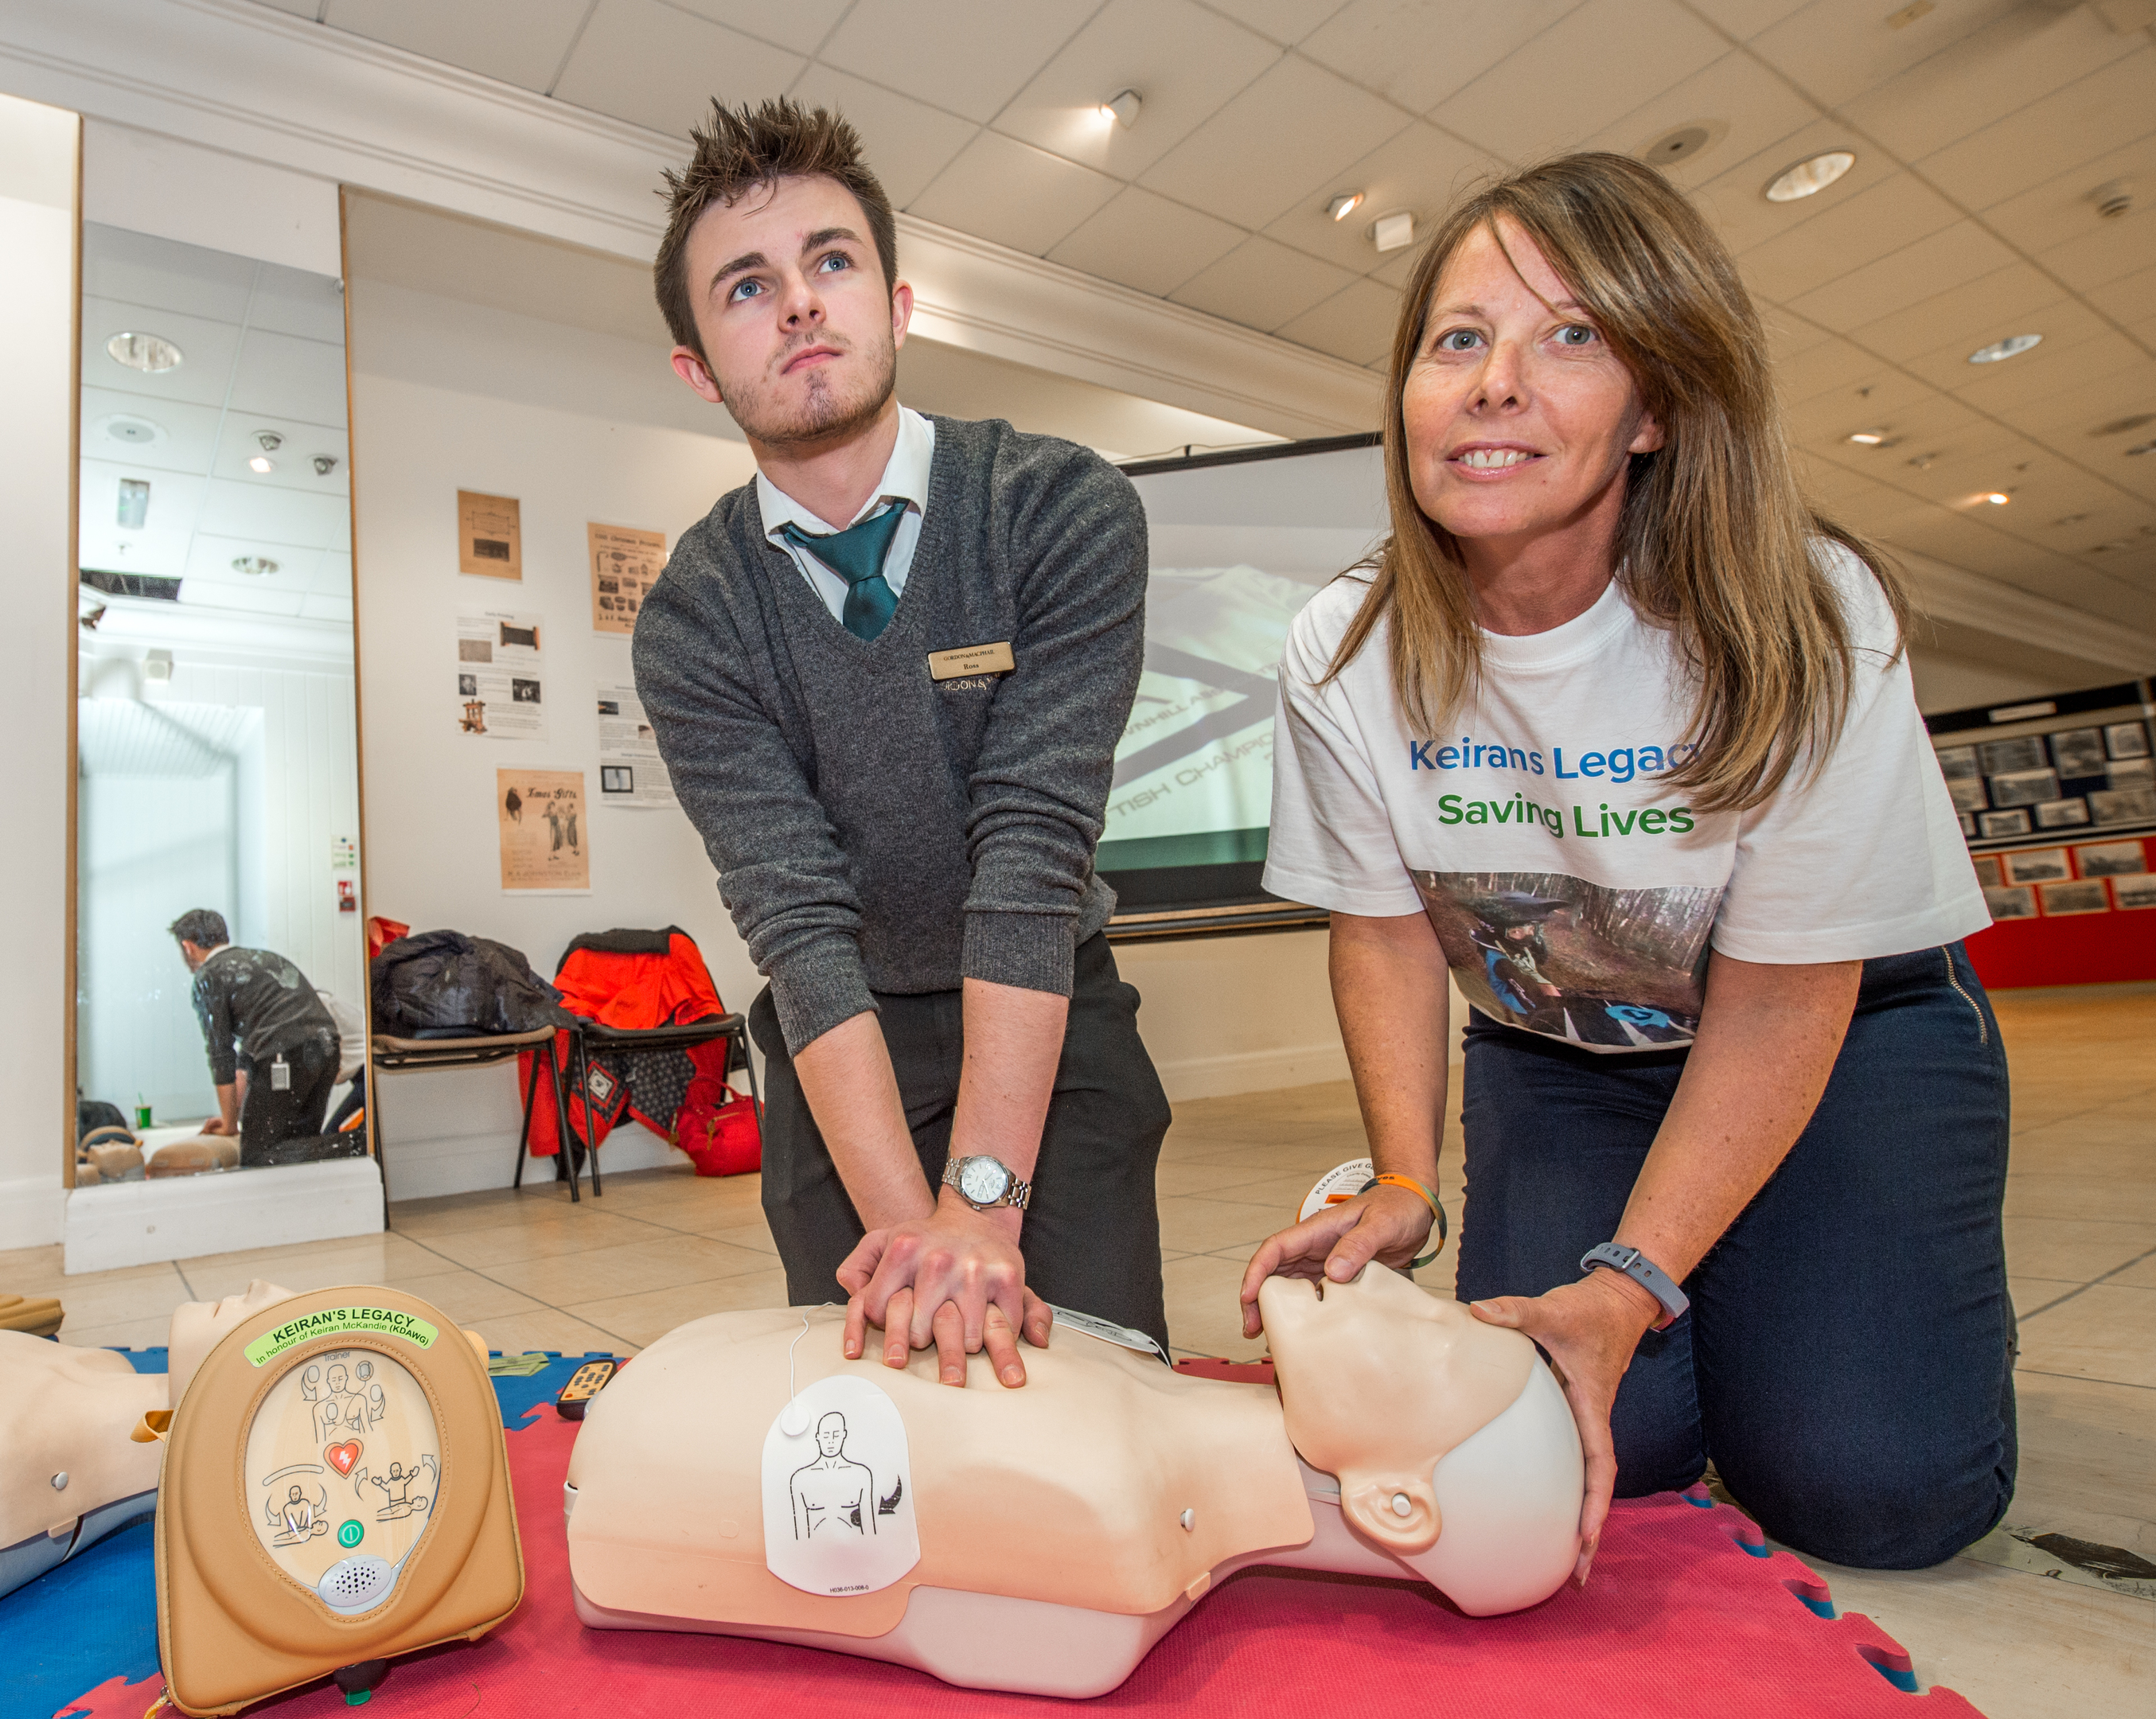 CPR training taking place at St Giles shopping centre with Sandra MacKandie alongside Keiran's childhood friend Ross Clarke.